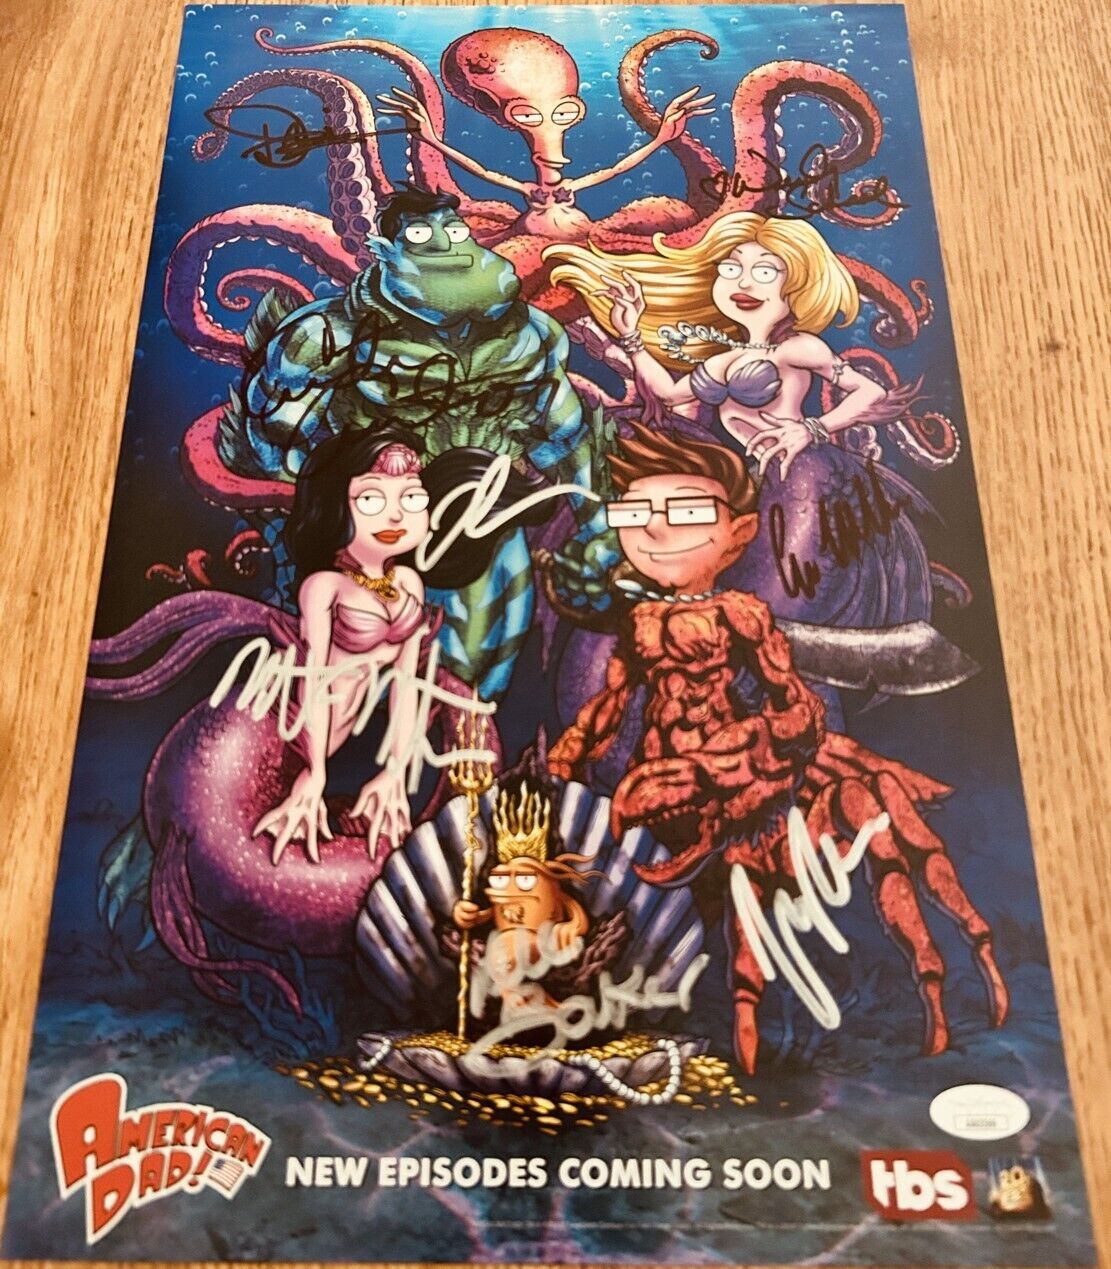 American Dad cast signed 2018 SDCC poster Curtis Armstrong Wendy Schaal +6 (JSA)